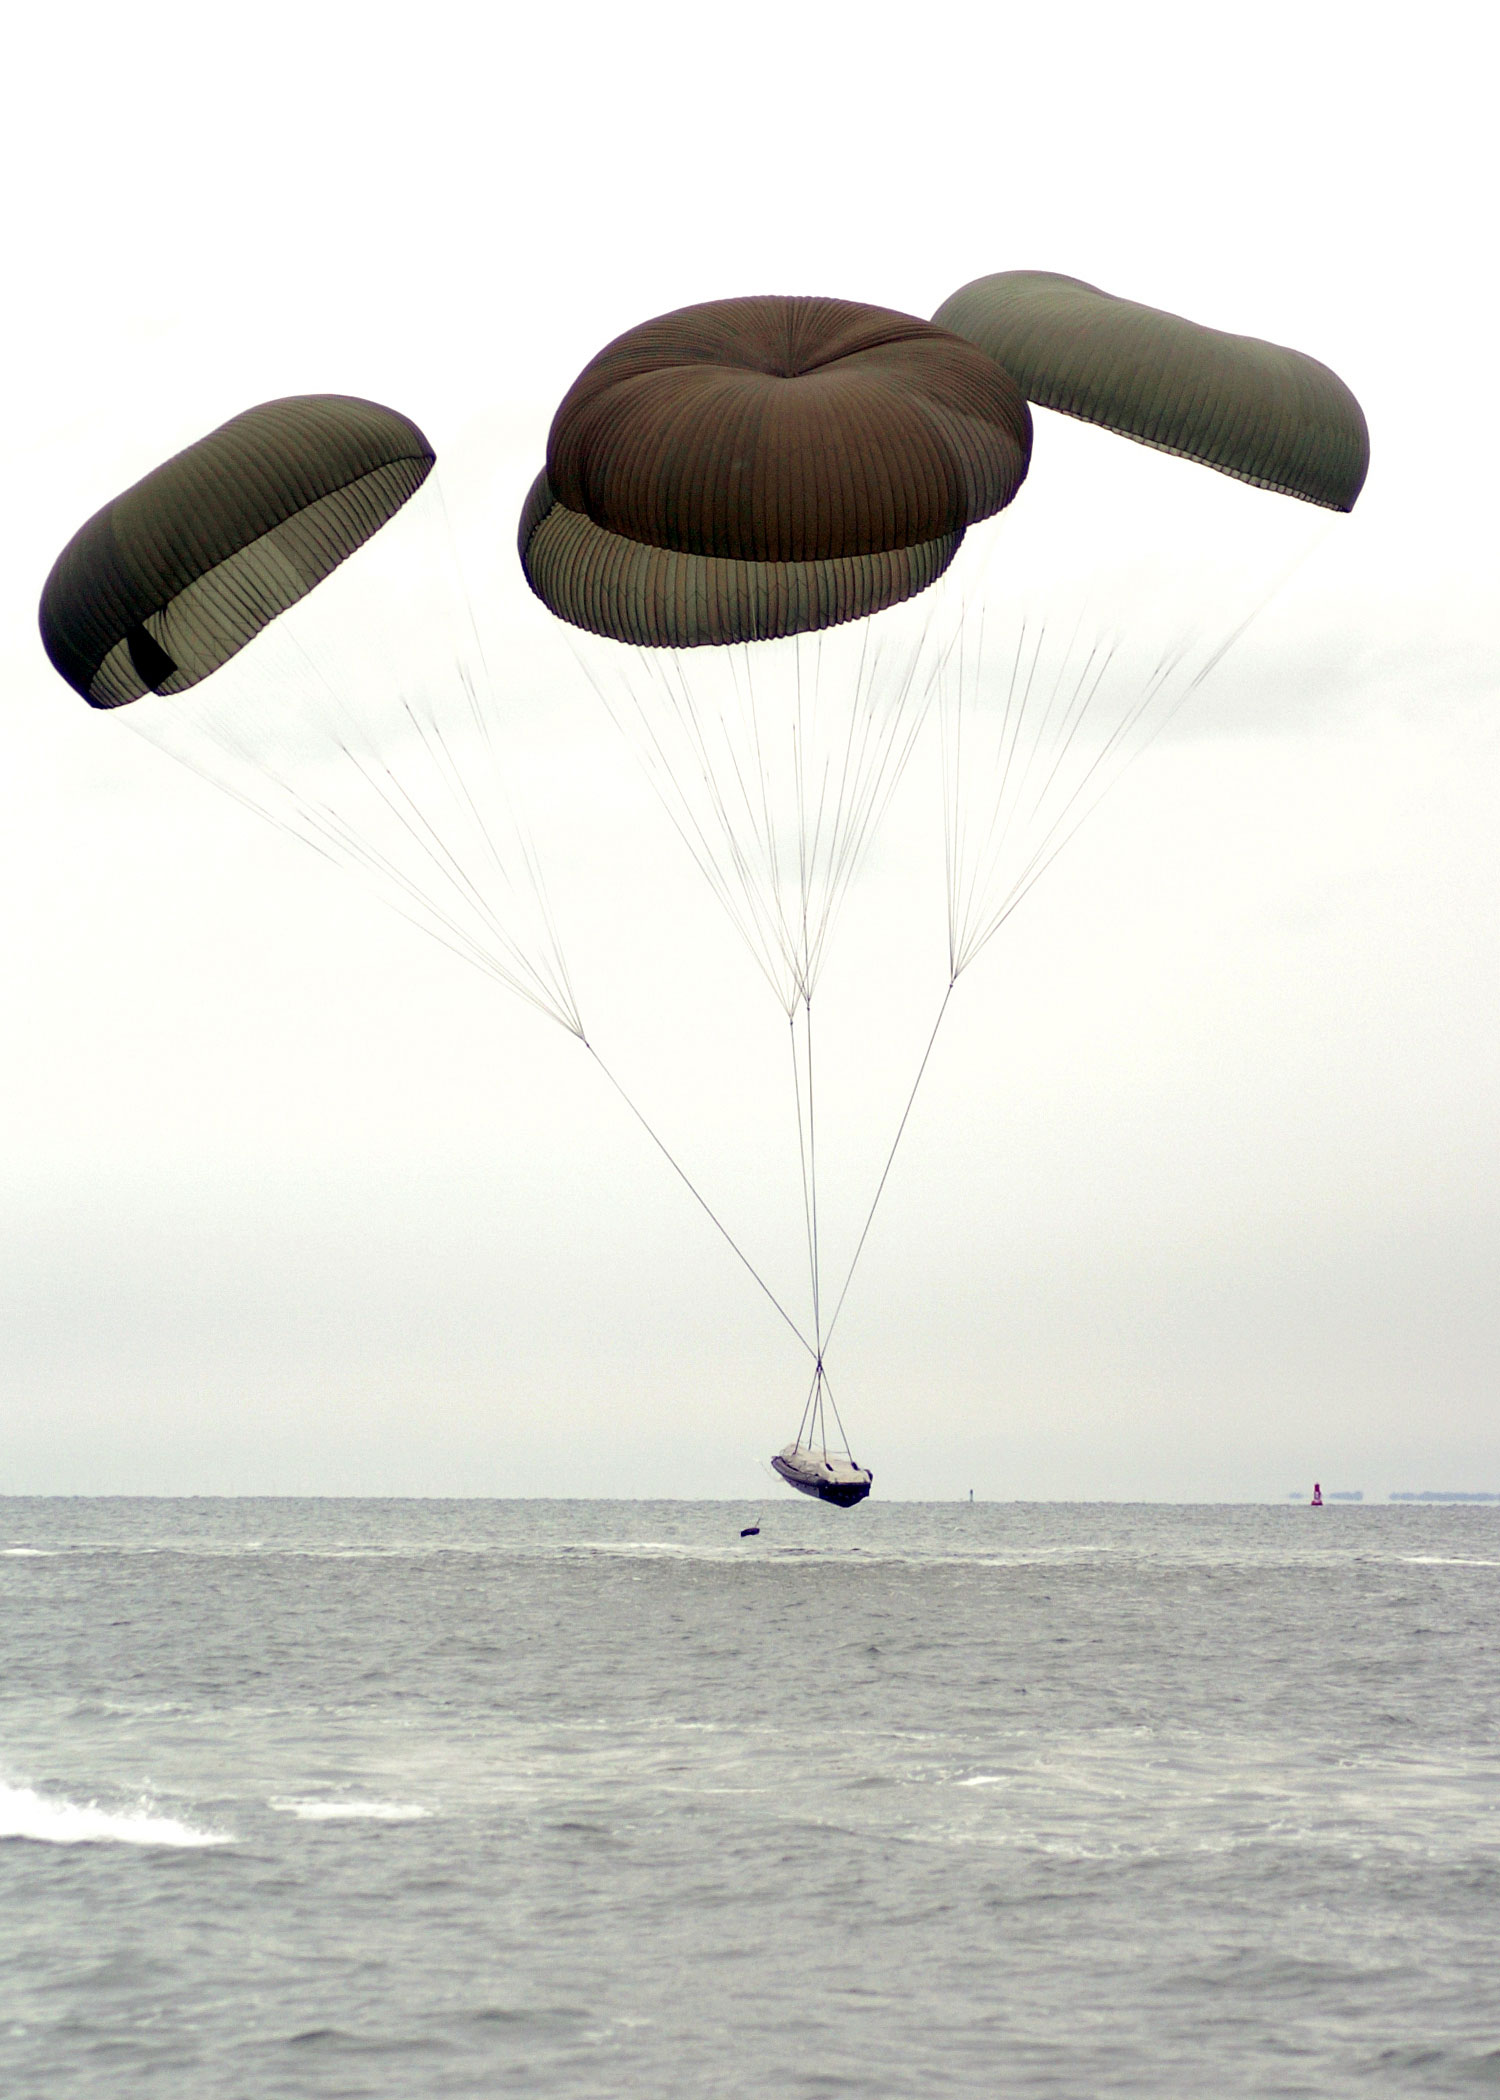 SWCC -  Maritime Craft Aerial Deployment System (MCADS)